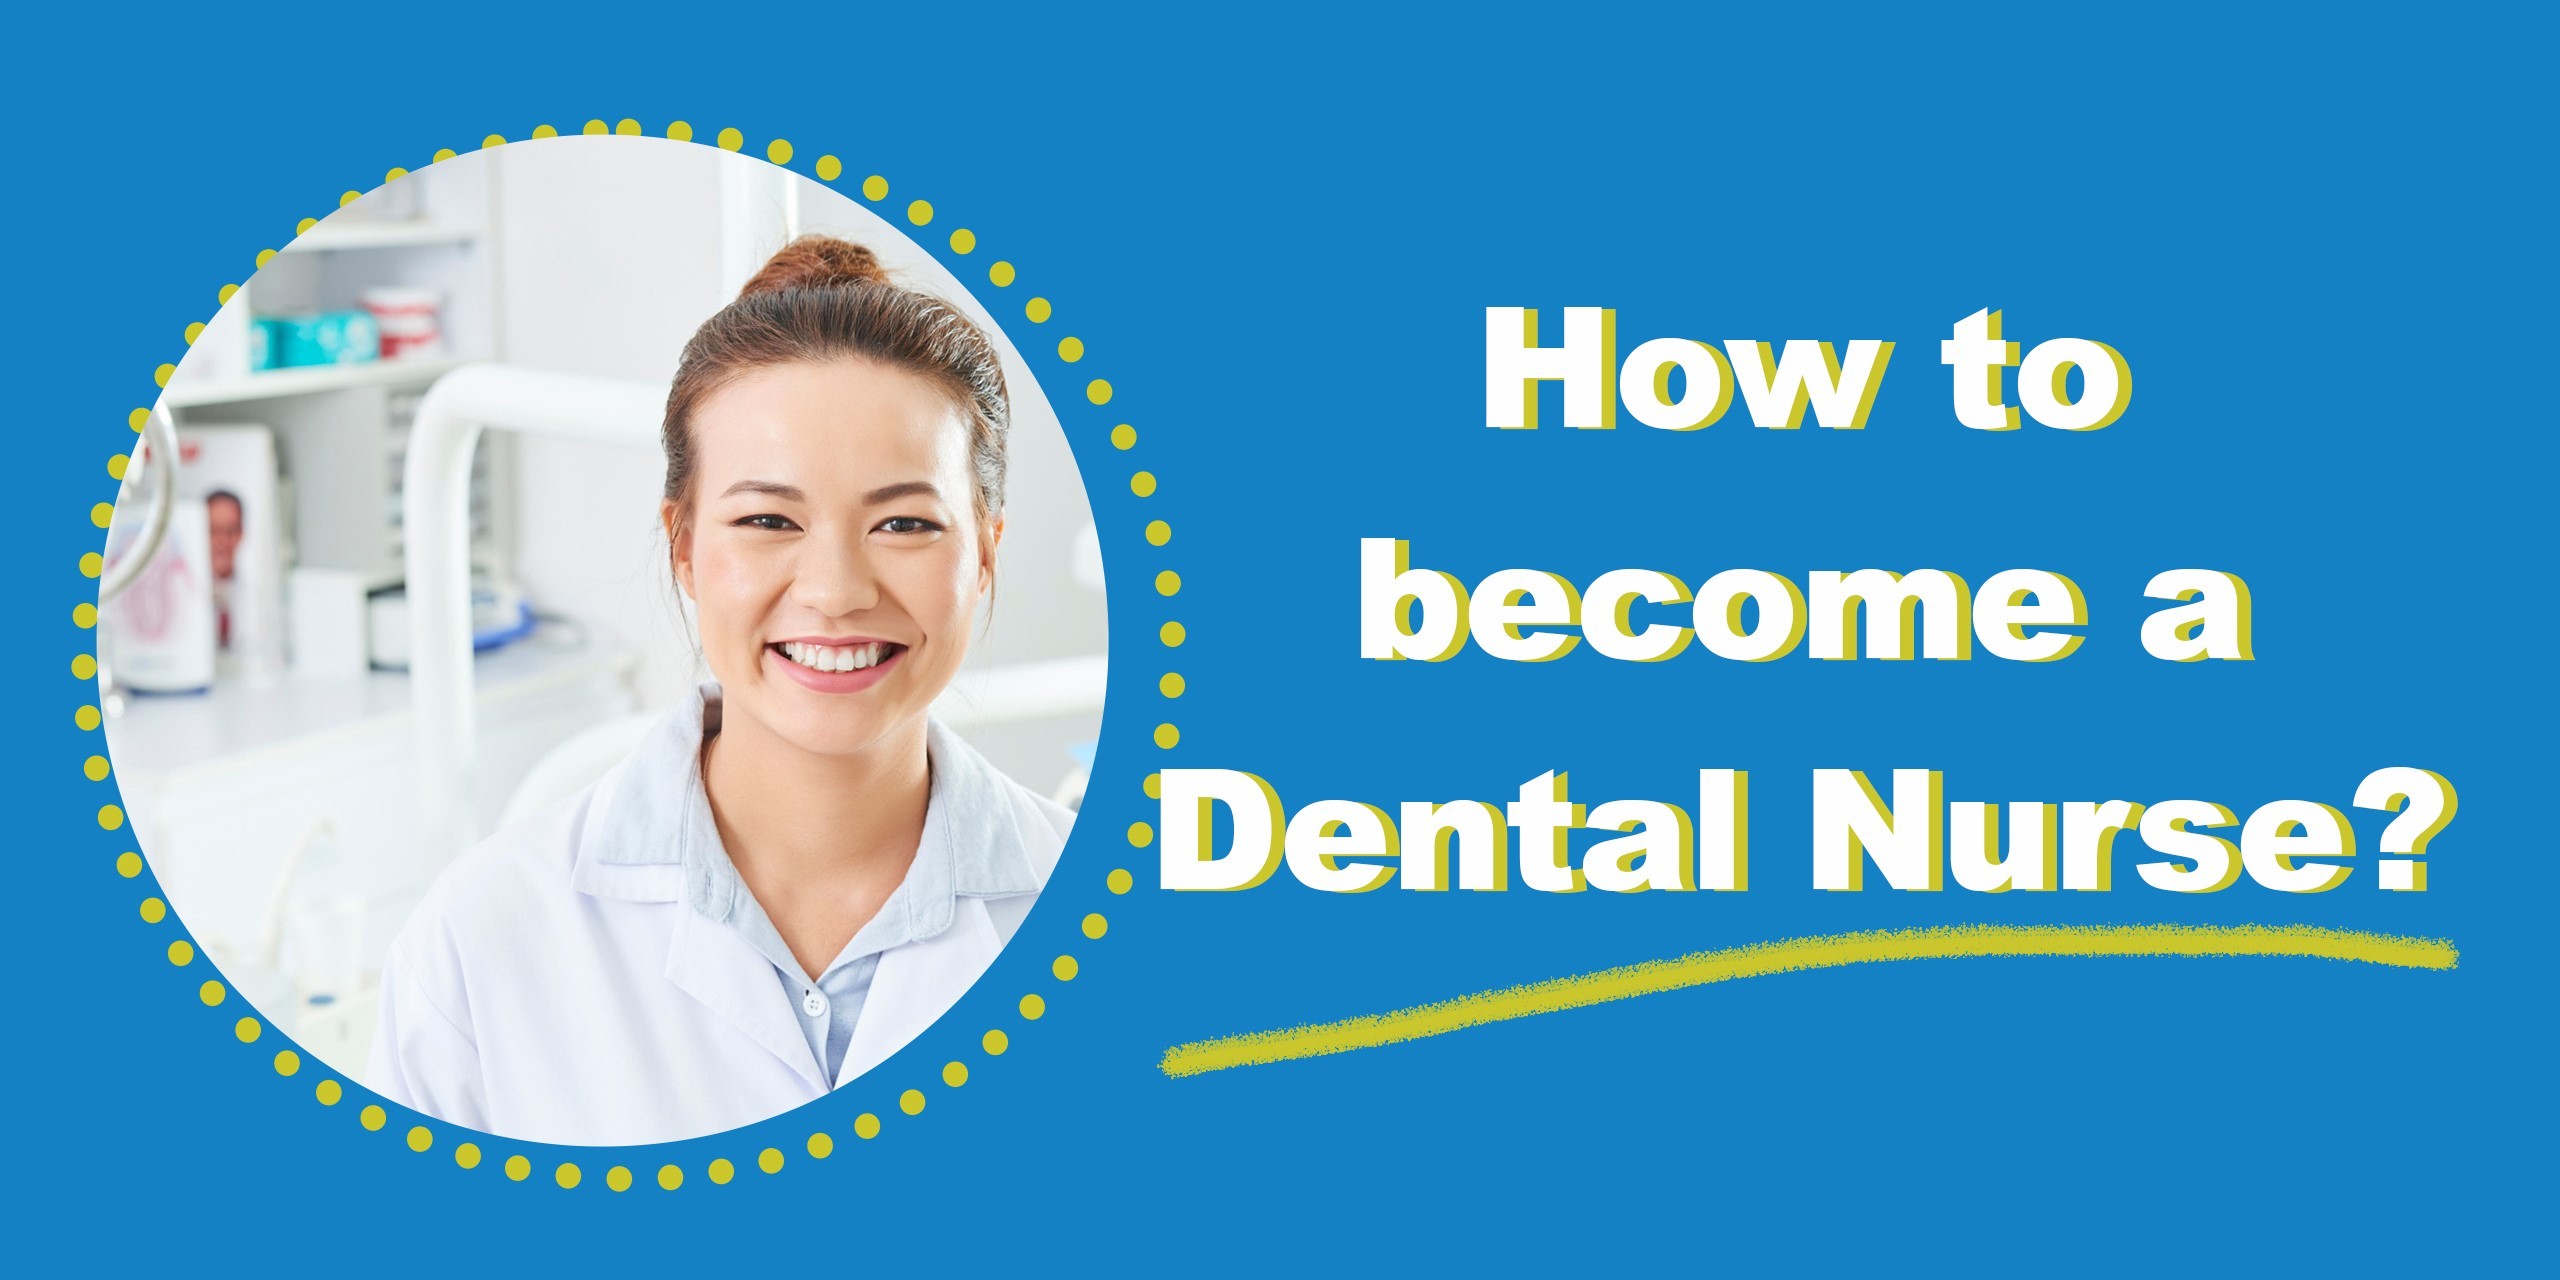 Step-by-Step Guide on how to become a Qualified Dental Nurse